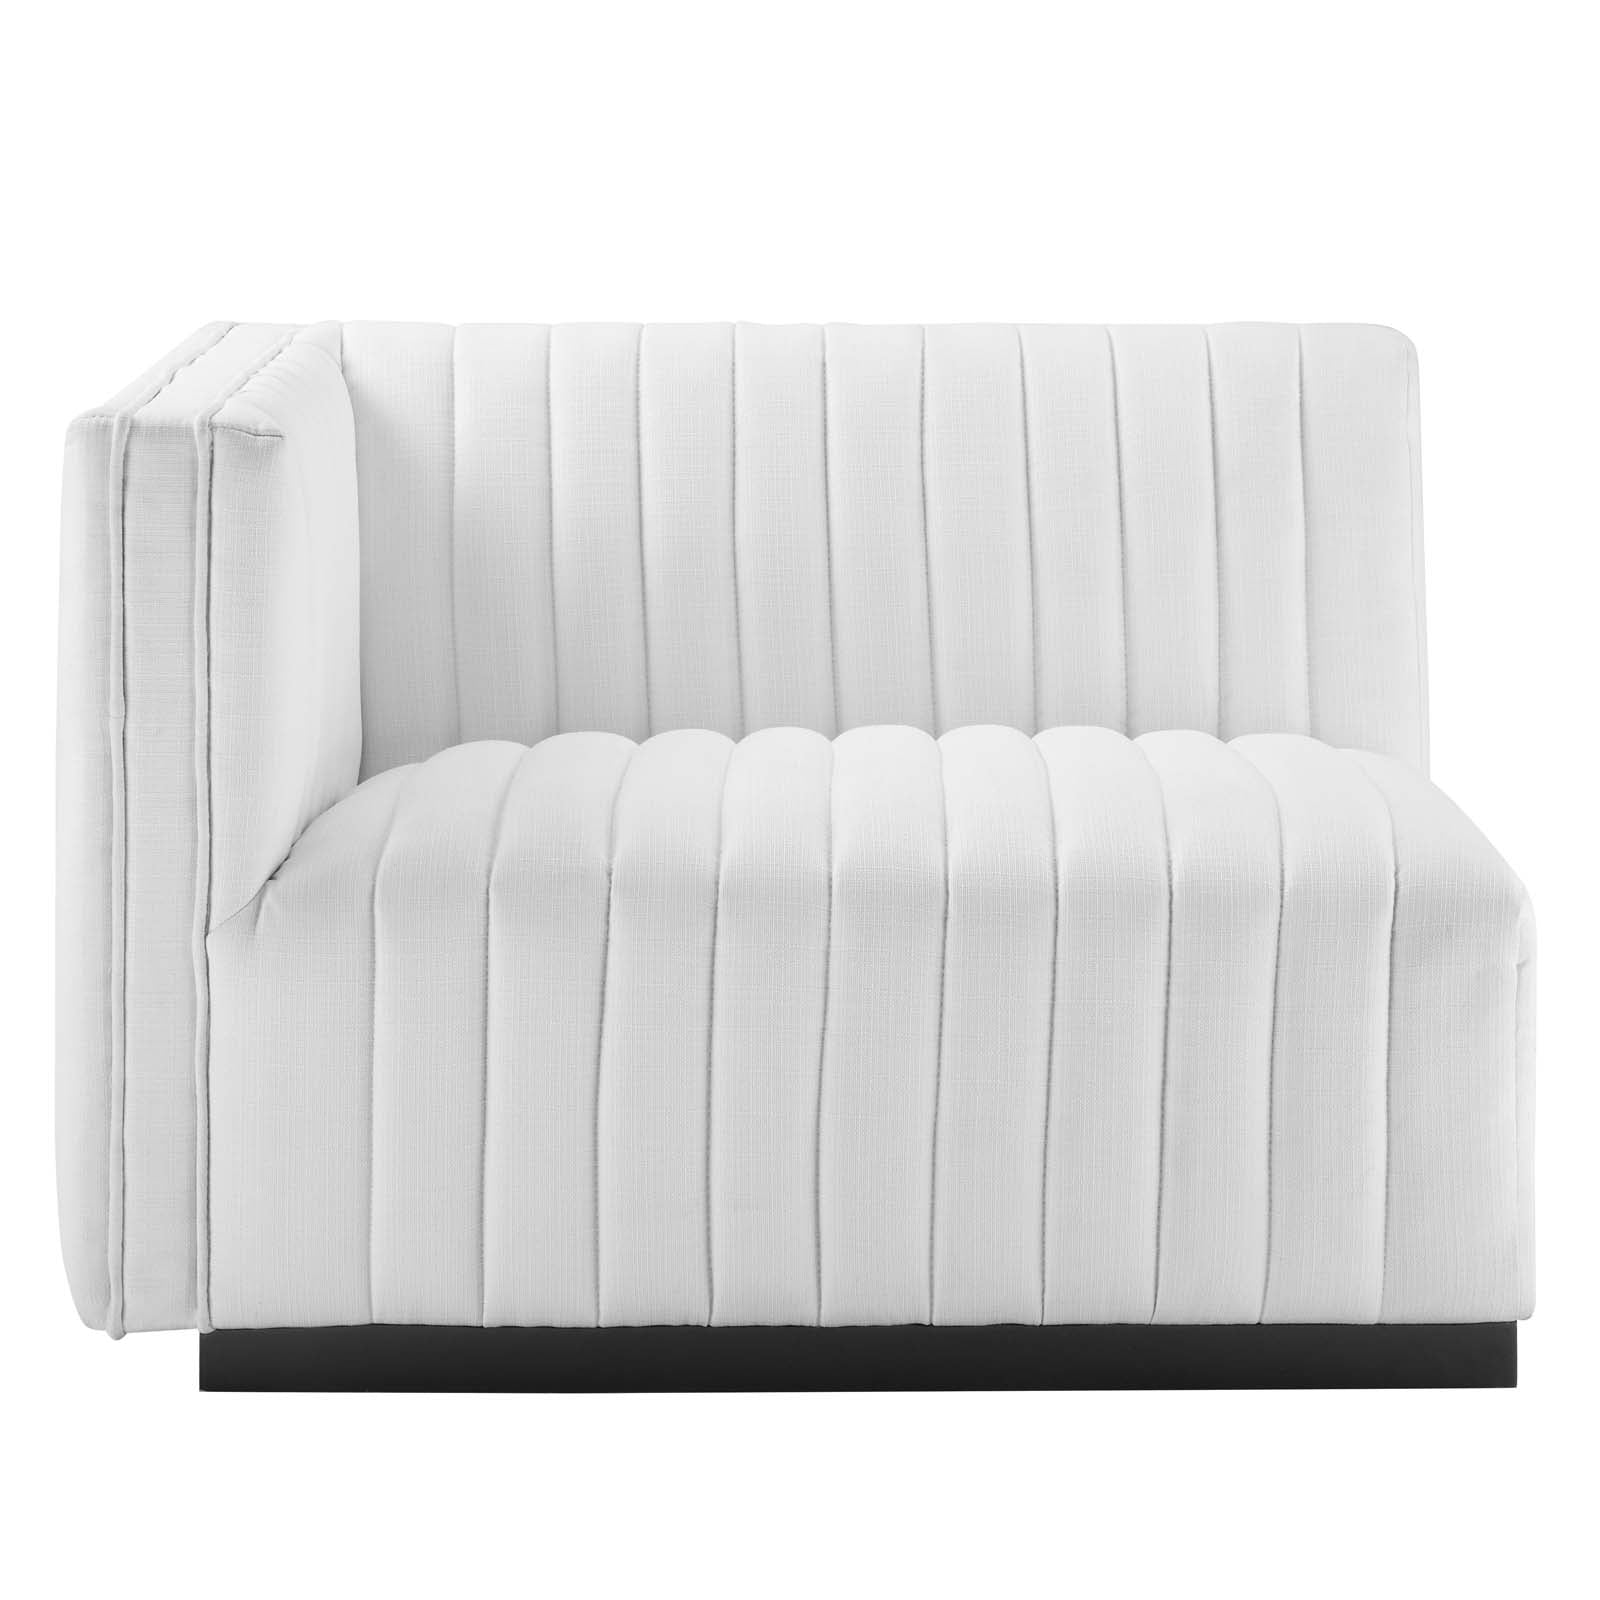 Modway Sectional Sofas - Conjure Channel Tufted Upholstered Fabric 5-Piece Sectional Black White